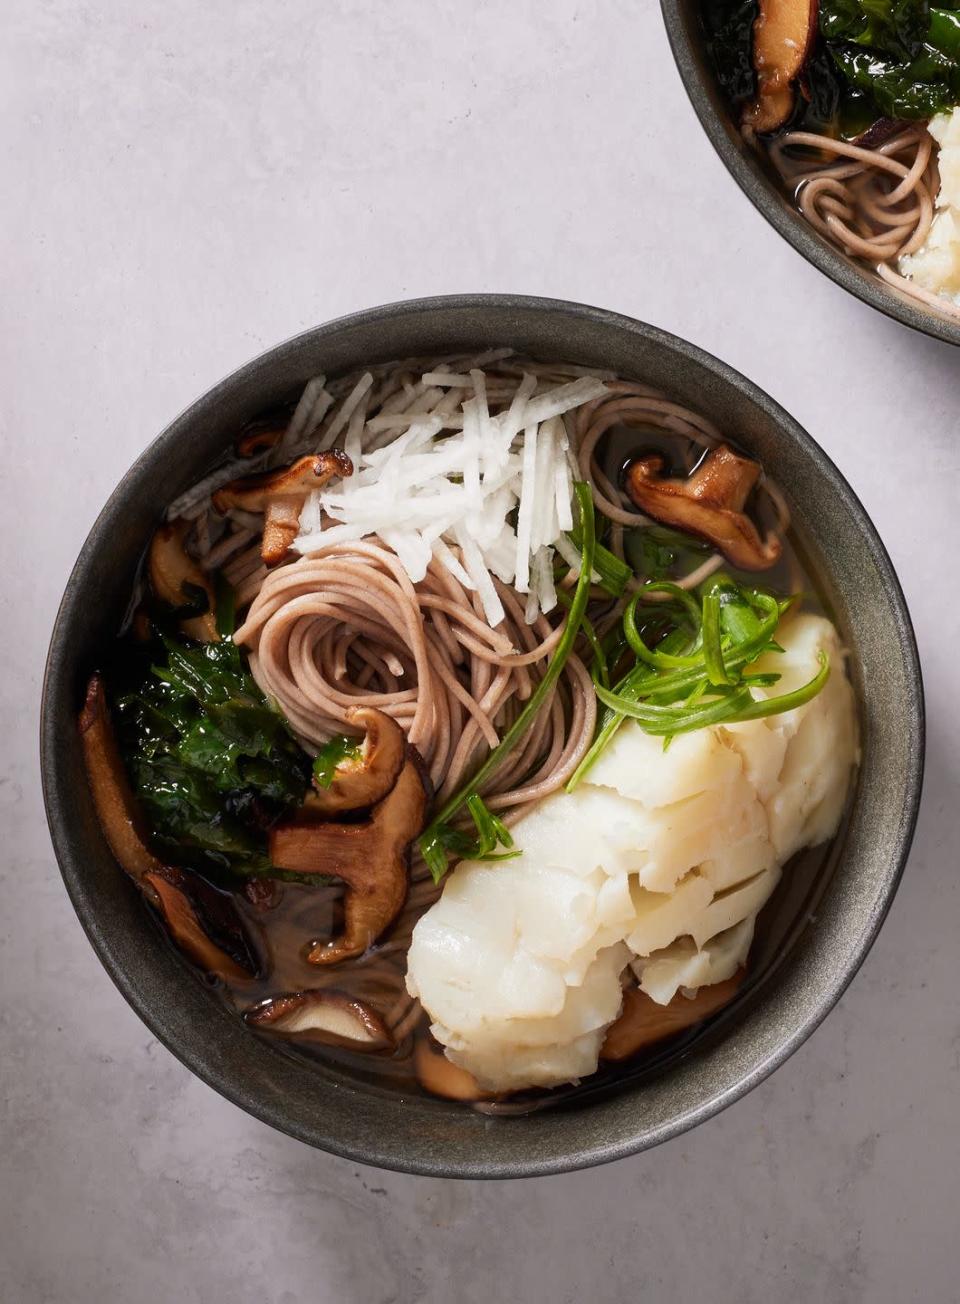 <p>Earthy soba noodles ground this delicate <a href="https://www.delish.com/content/soup-recipes/" rel="nofollow noopener" target="_blank" data-ylk="slk:soup" class="link ">soup</a> made with a light and flavorful <em>awase dashi</em> (AKA Japanese seafood stock) and flaky cod. It’s sophisticated enough for a dinner party, easy enough for a <a href="https://www.delish.com/weeknight-dinners/" rel="nofollow noopener" target="_blank" data-ylk="slk:weeknight dinner" class="link ">weeknight dinner</a>, and gentle enough to soothe a stomachache or persistent cold.</p><p>Get the <strong><a href="https://www.delish.com/cooking/a38239087/soba-noodles-recipe/" rel="nofollow noopener" target="_blank" data-ylk="slk:Soba Cod & Mushroom Soup recipe" class="link ">Soba Cod & Mushroom Soup recipe</a></strong>.</p>